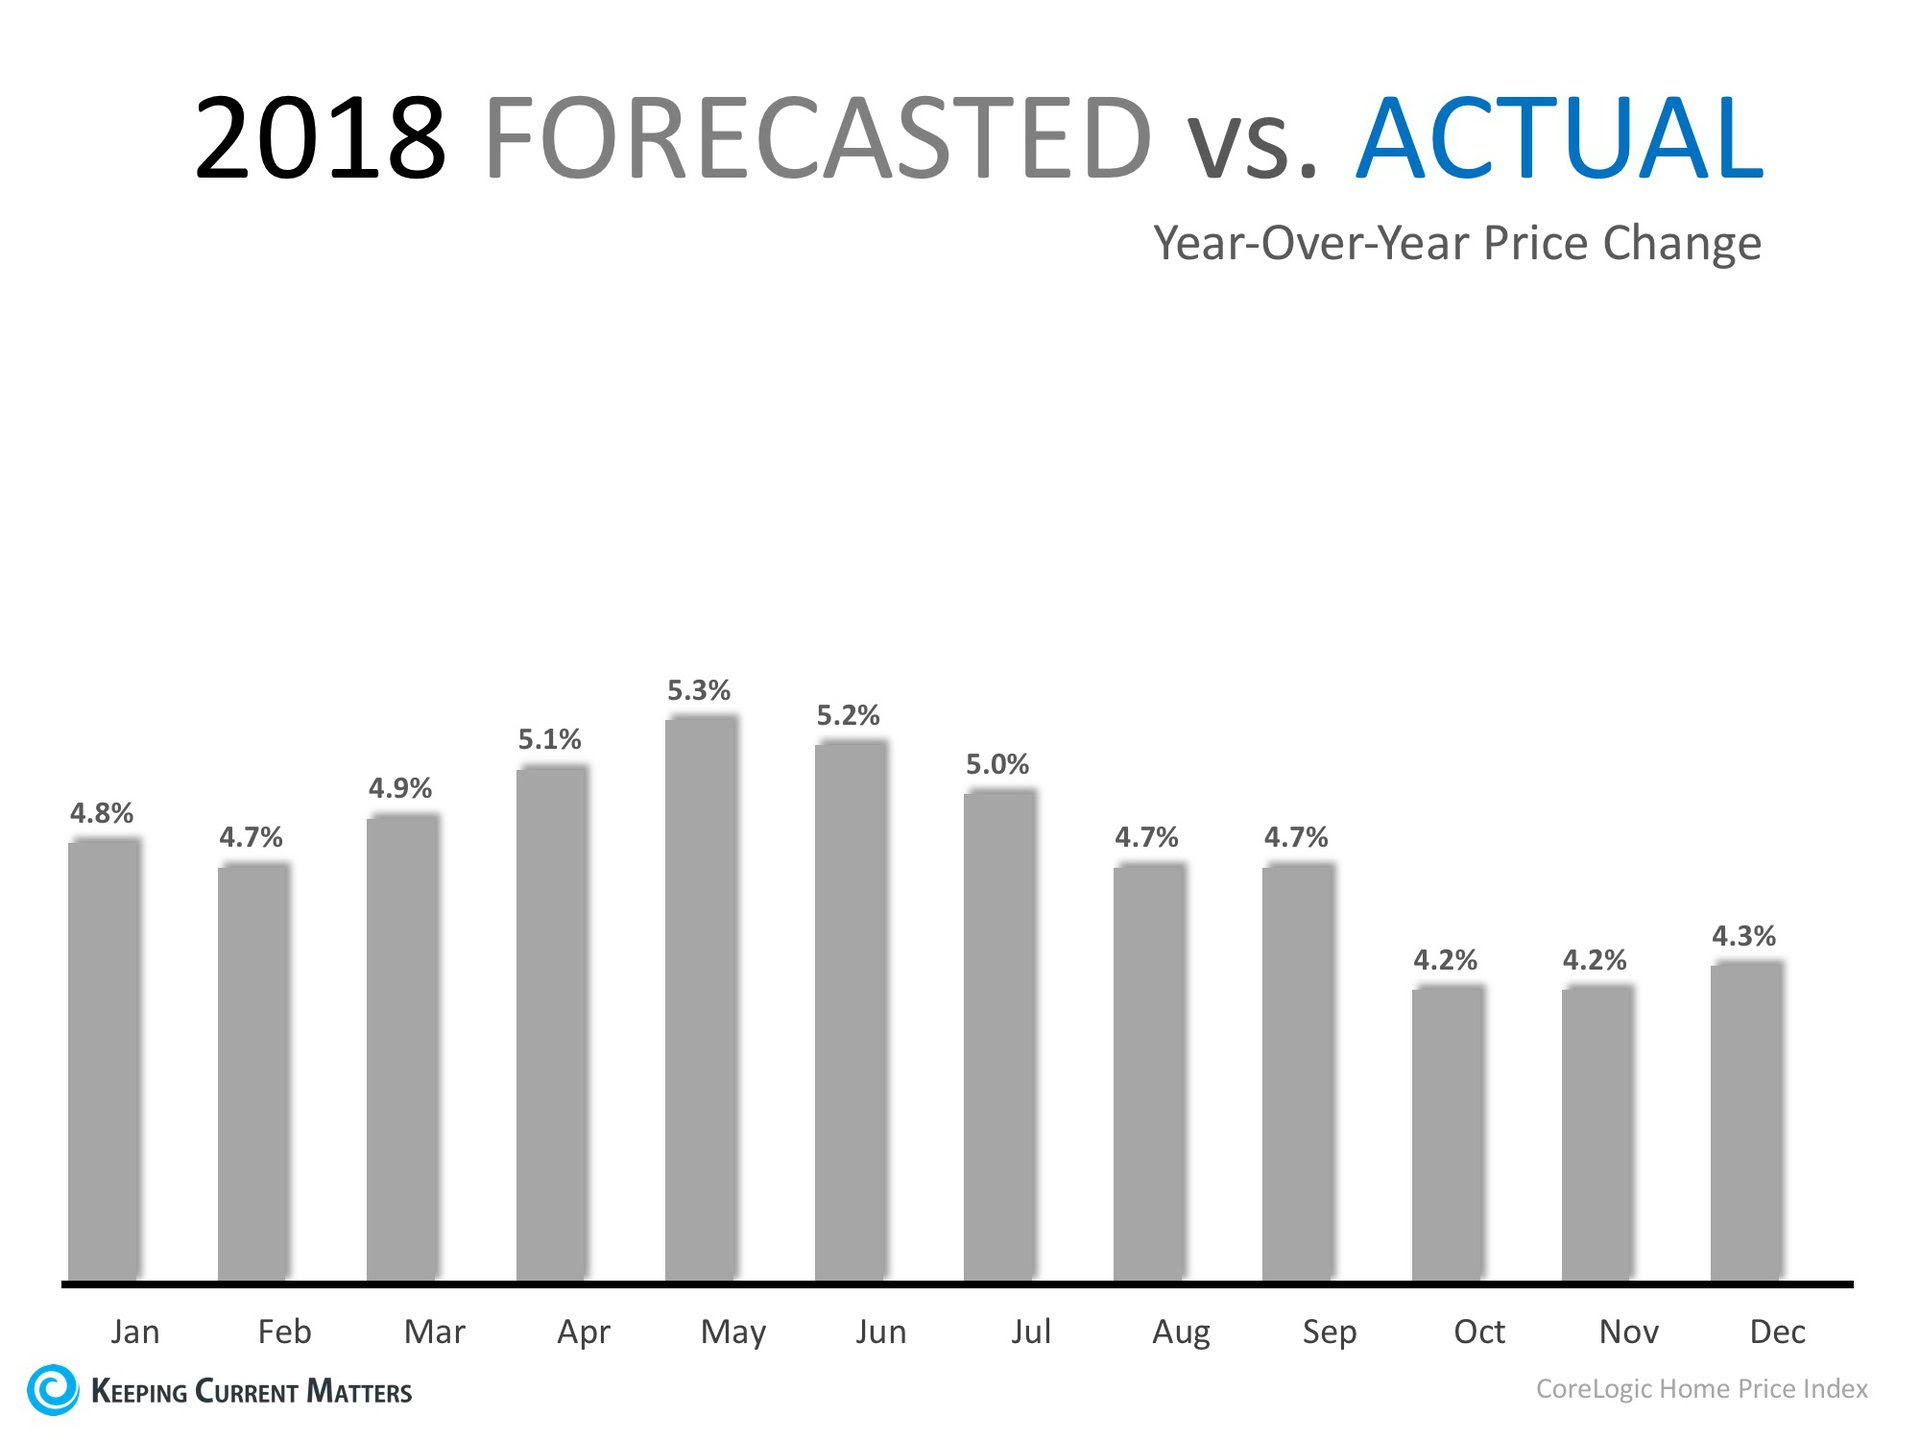 Home Prices Have Appreciated 6.9% in 2018 | Keeping Current Matters